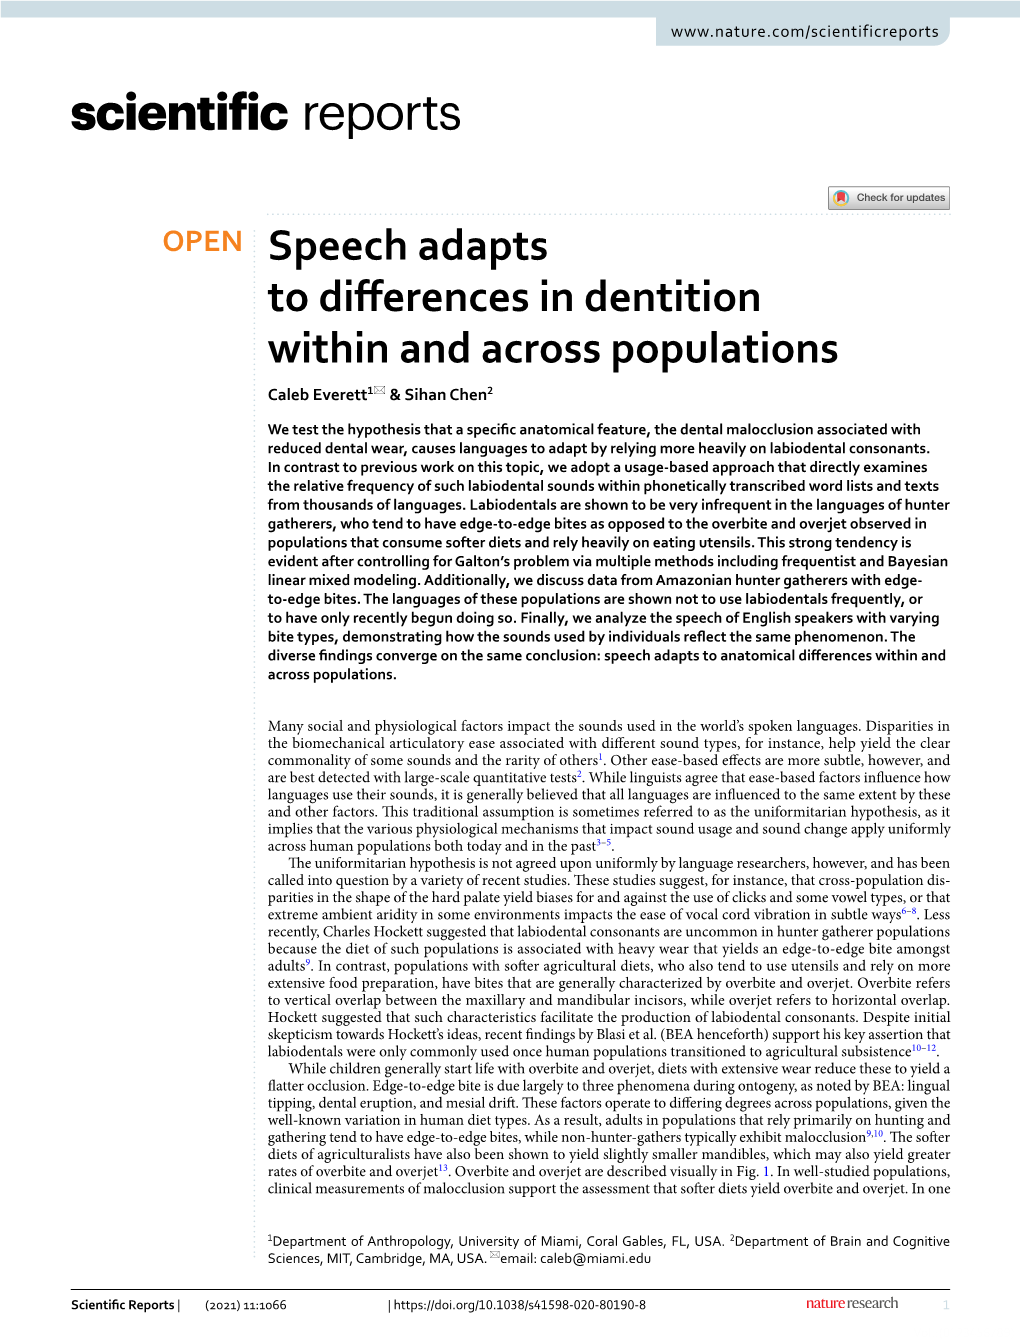 Speech Adapts to Differences in Dentition Within and Across